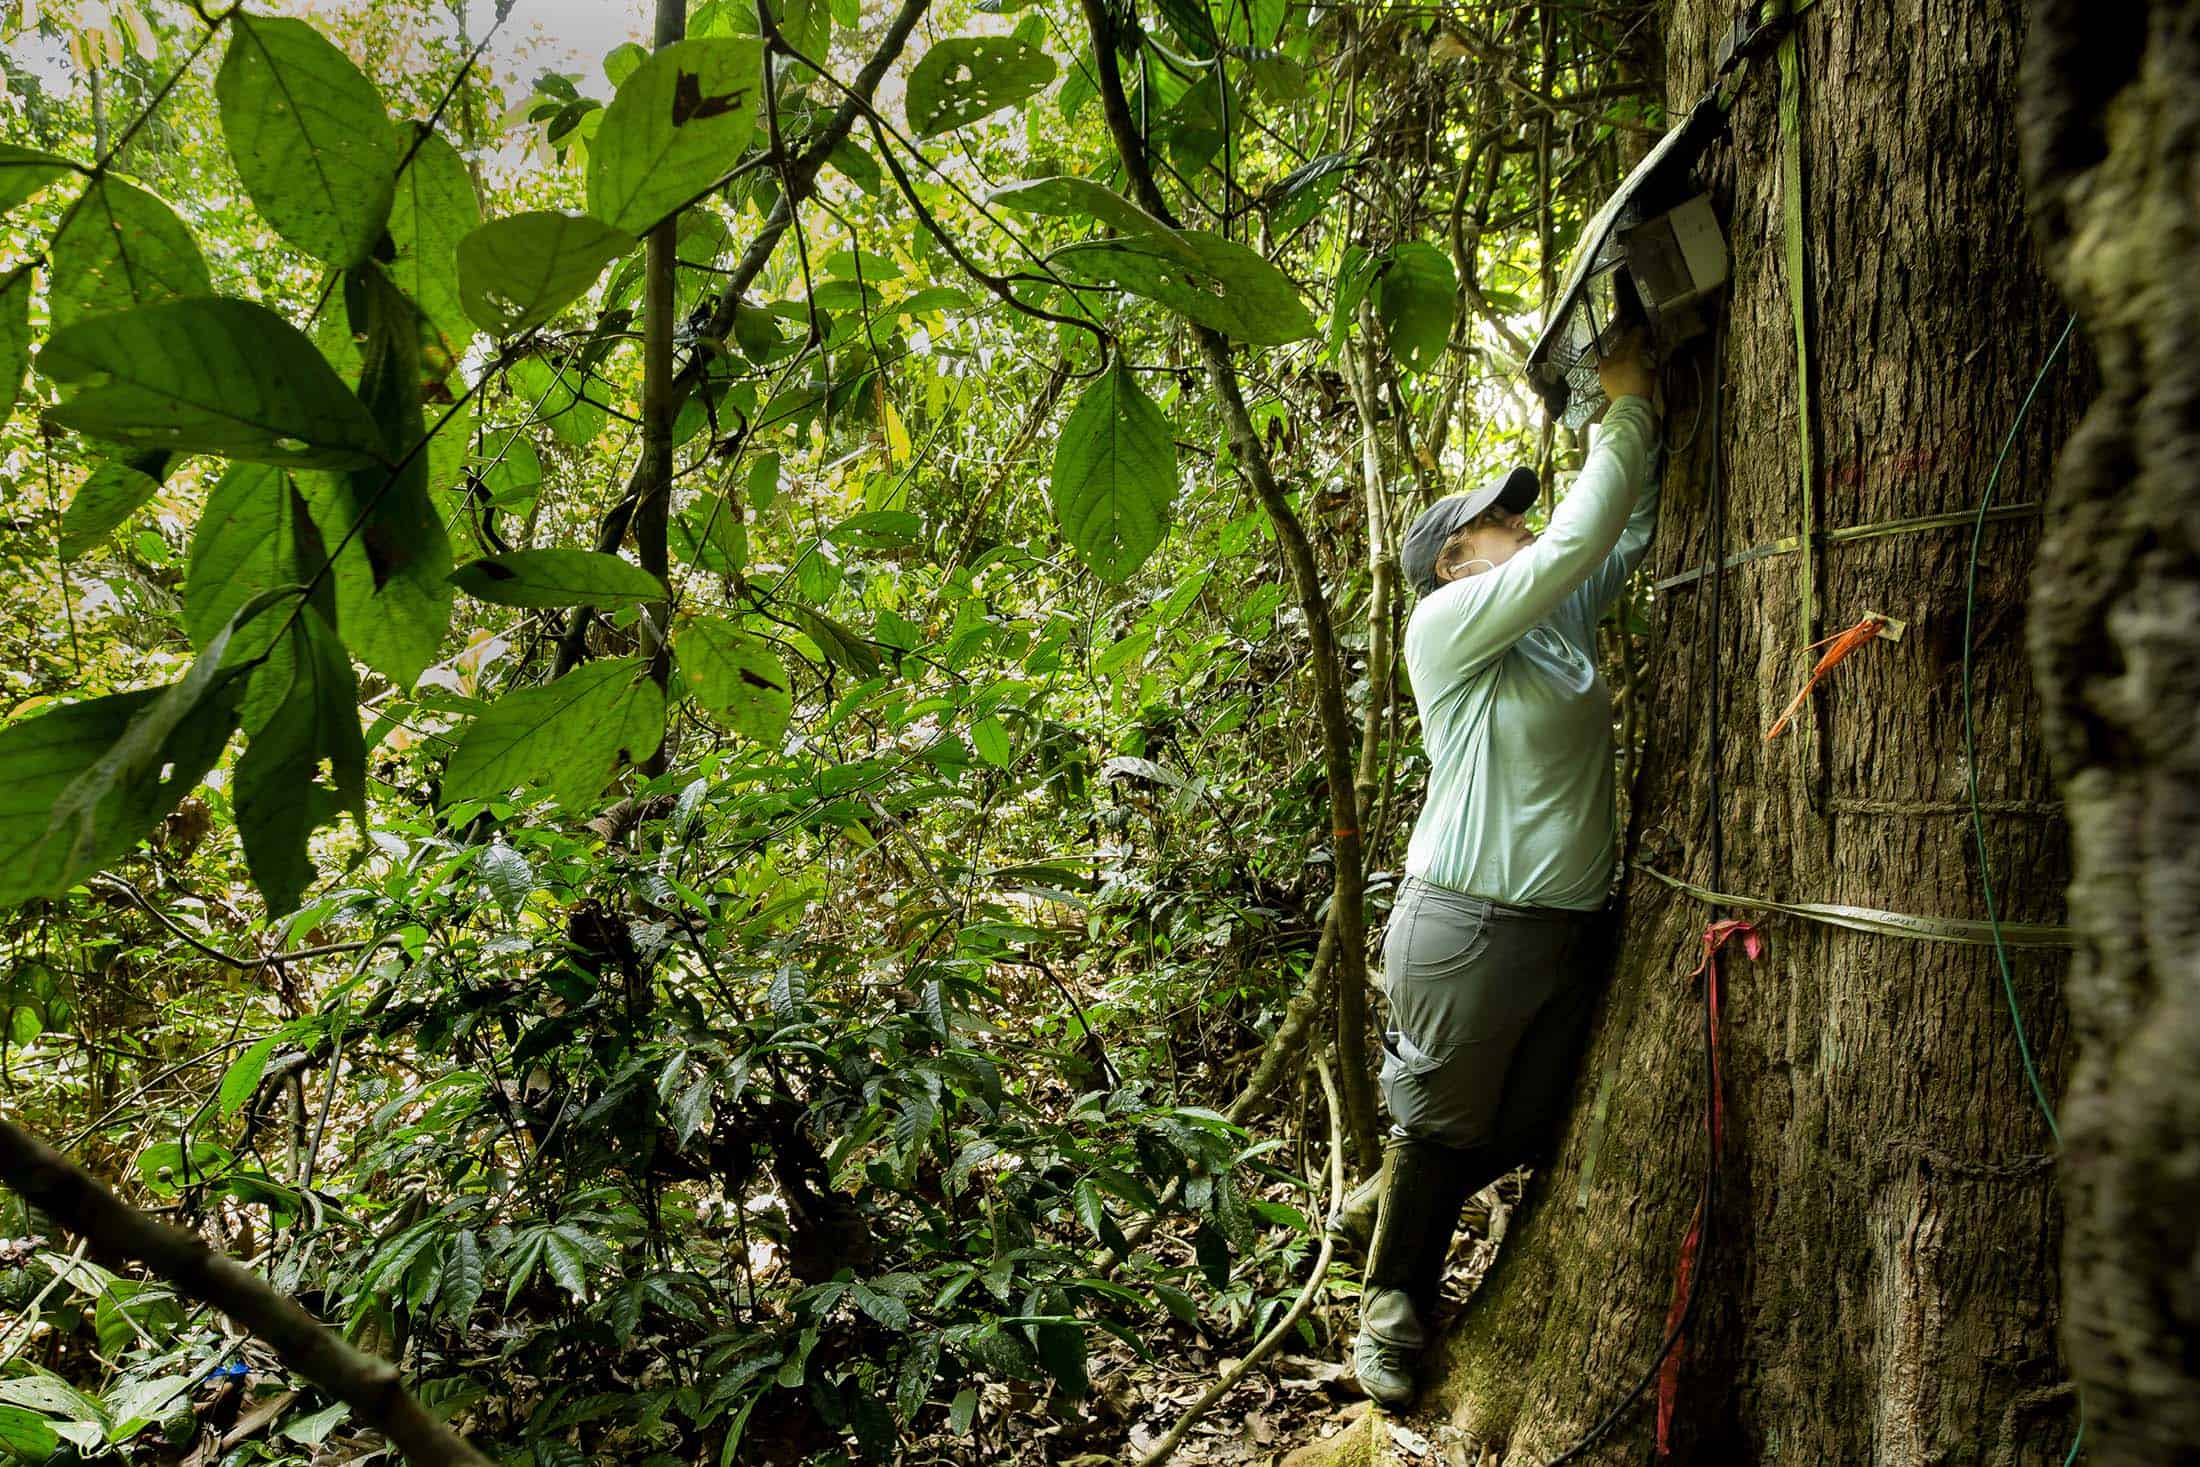 Person installs sensors on a tree in the Amazon rainforest